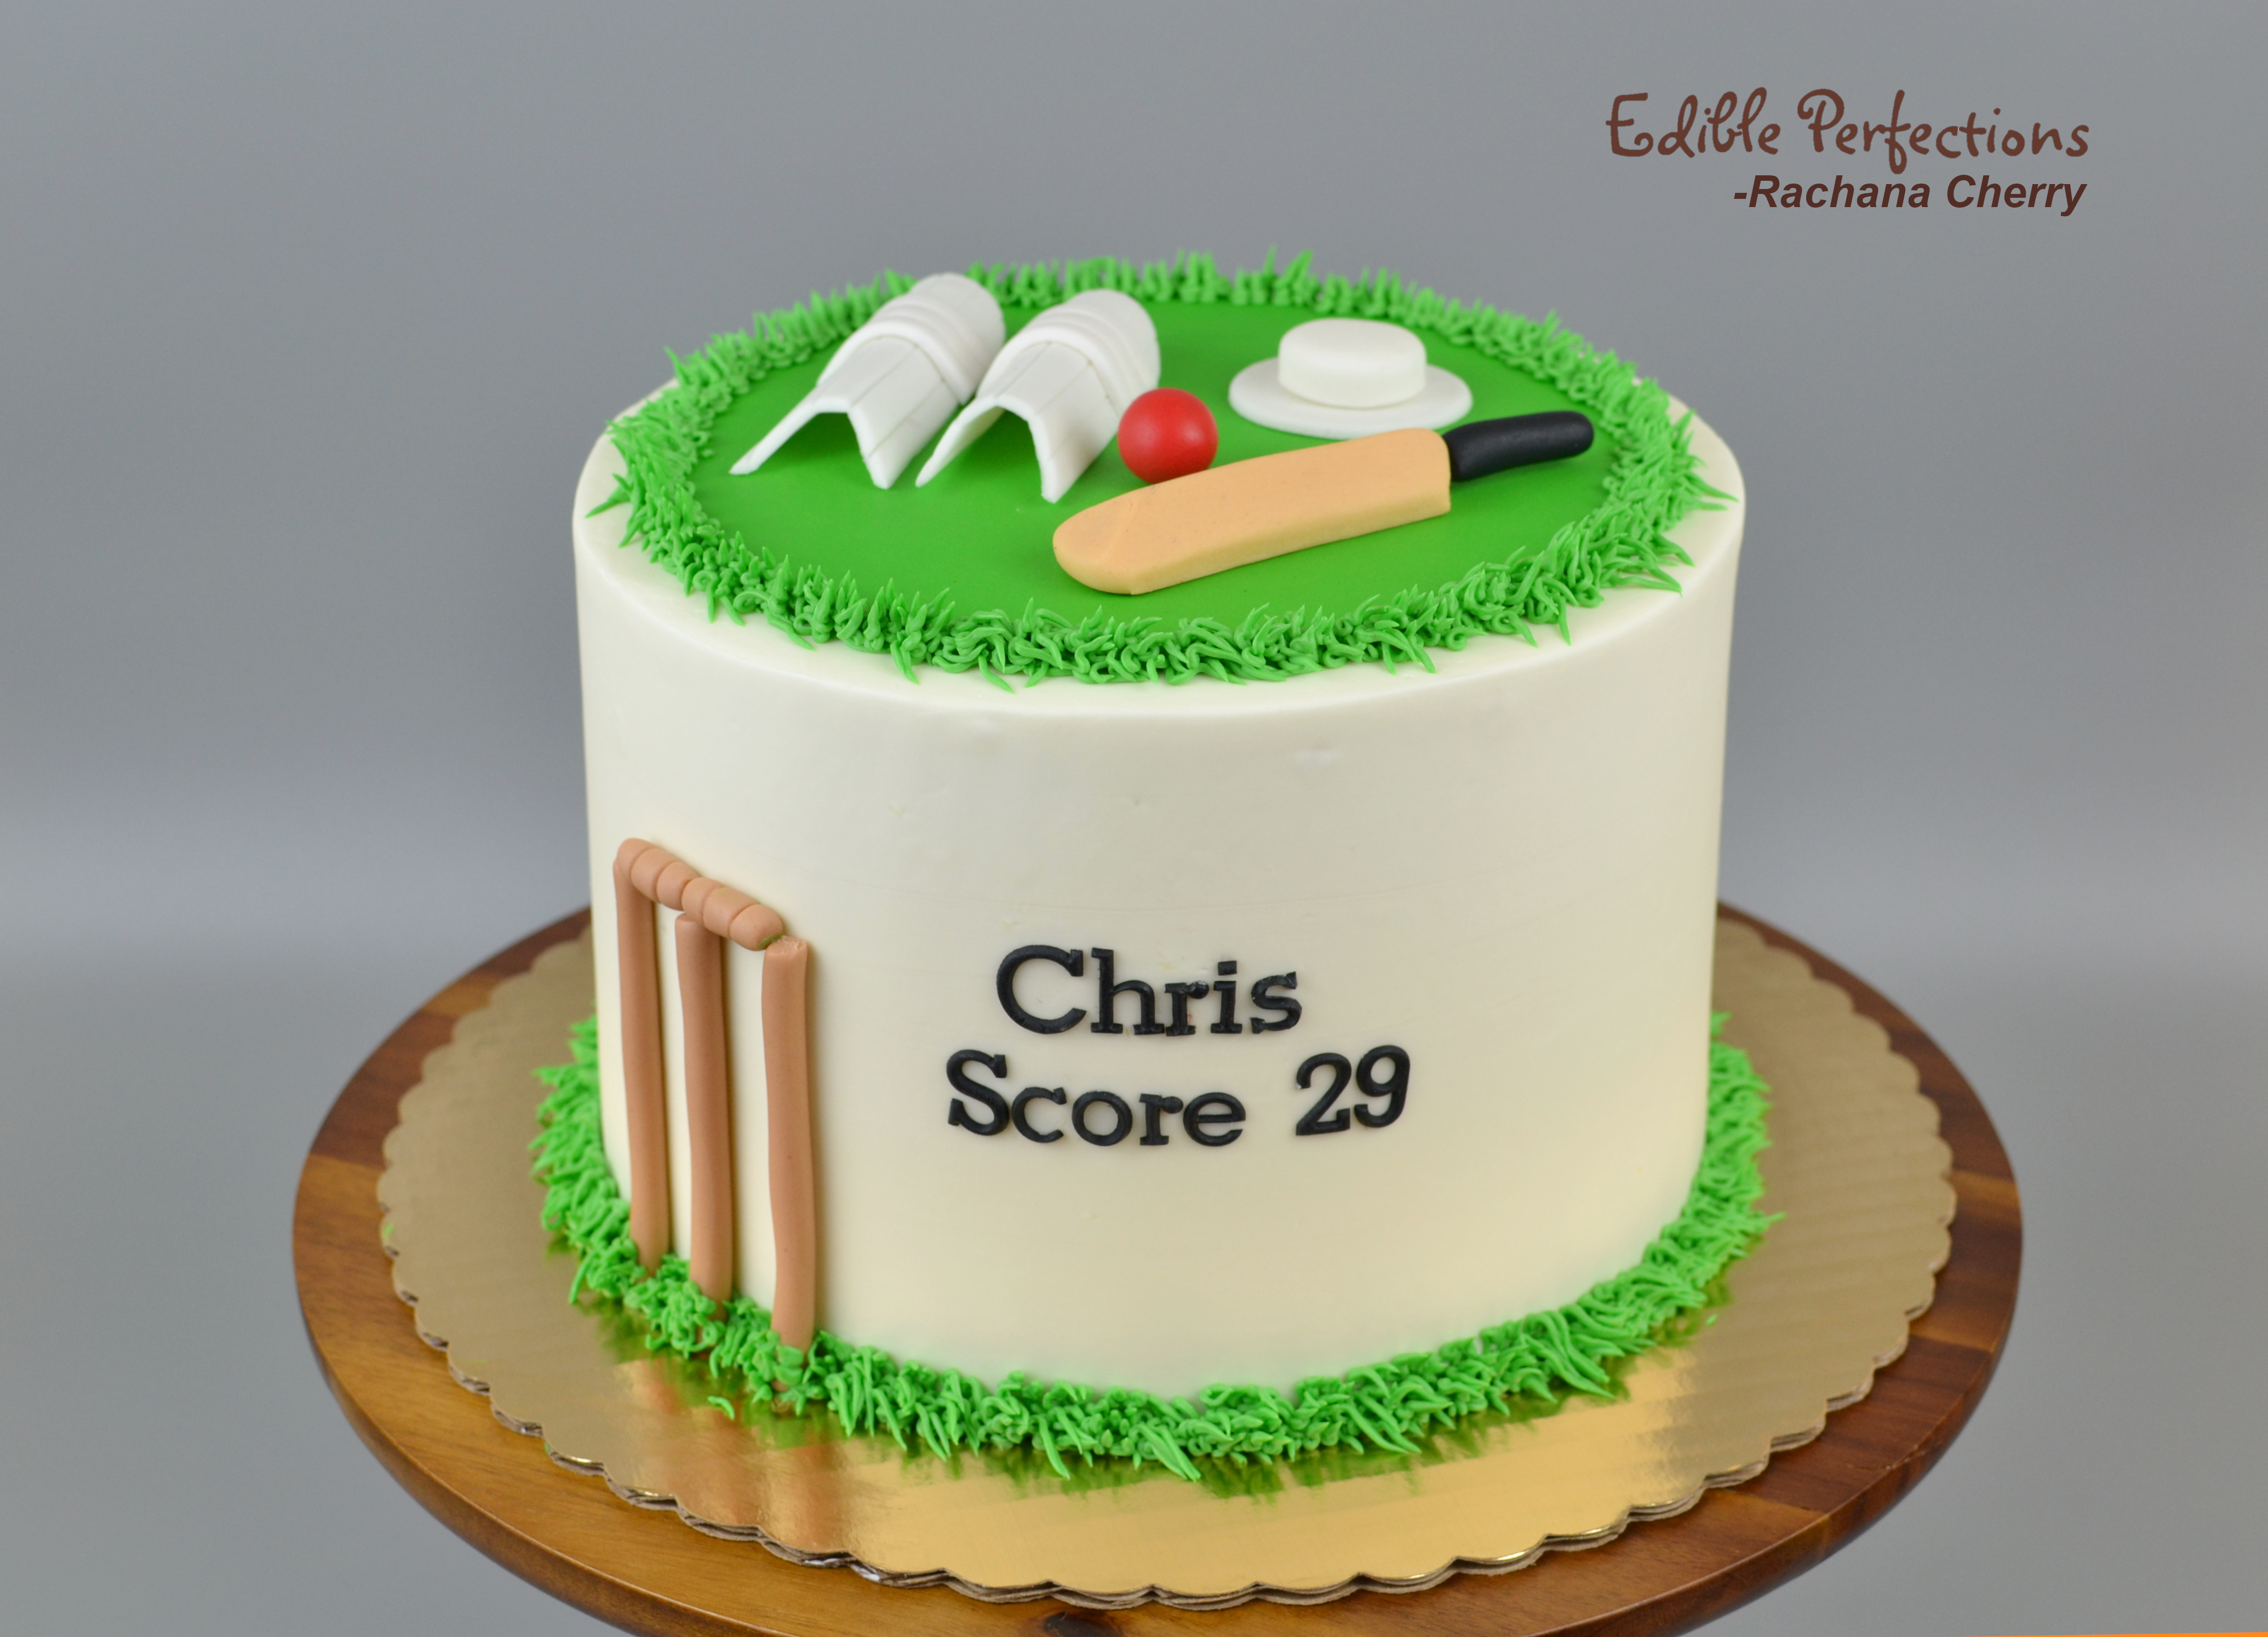 Photo Cake For Famous Cricketer